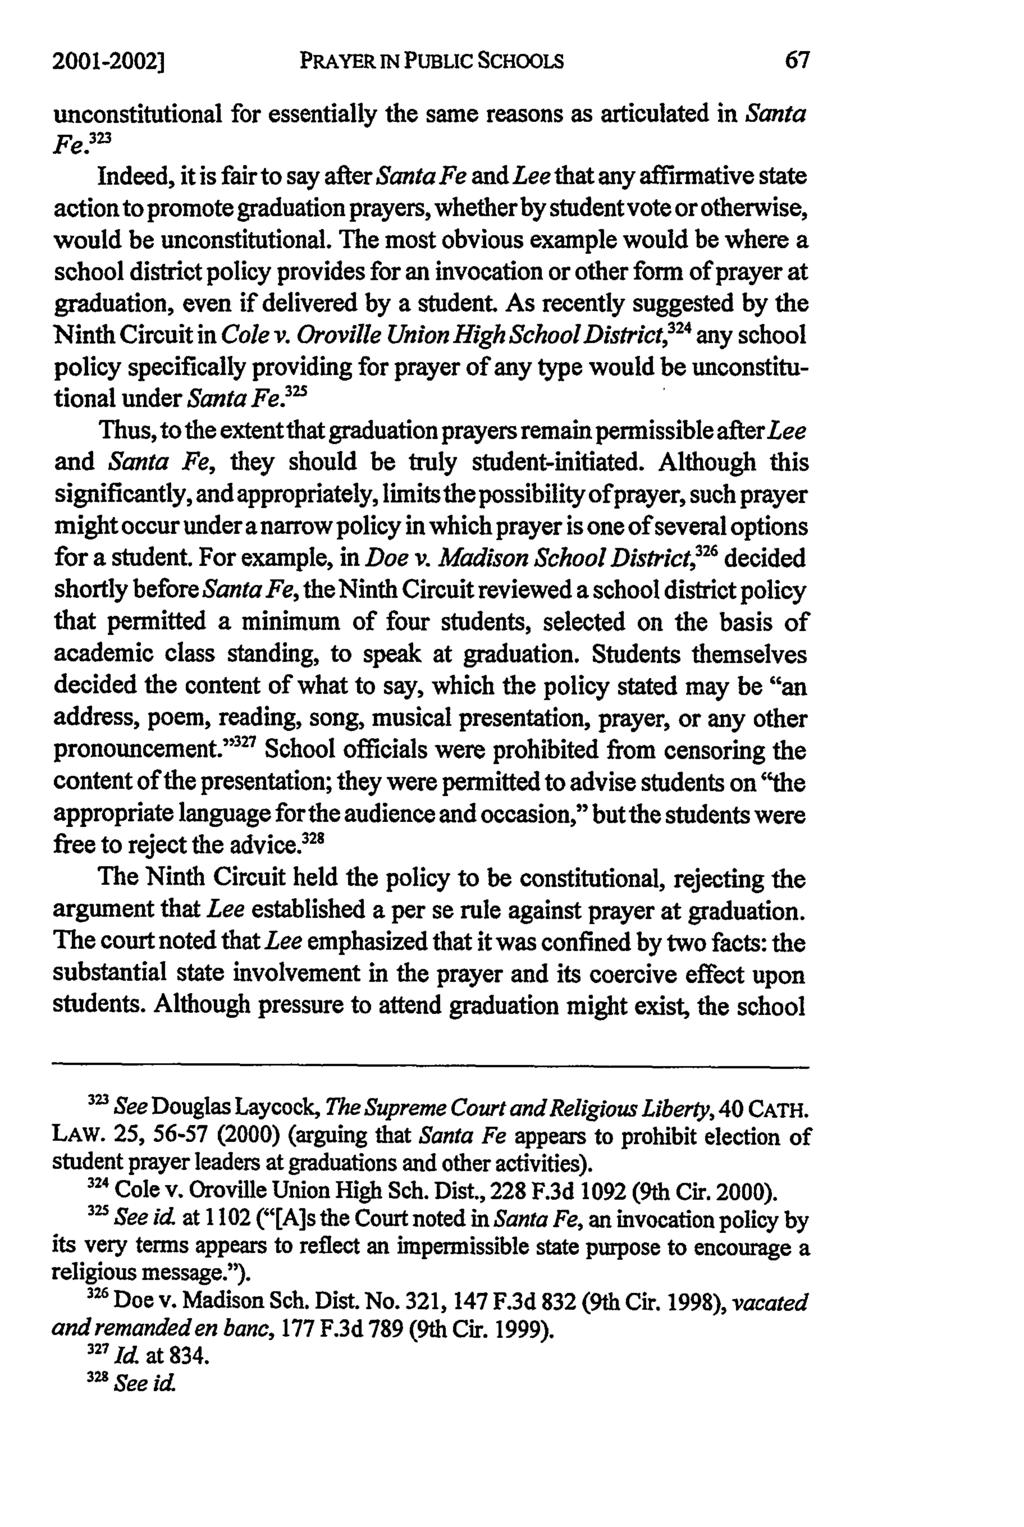 2001-2002) PRAYER IN PUBLIC SCHOOLS unconstitutional for essentially the same reasons as articulated in Santa Fe.